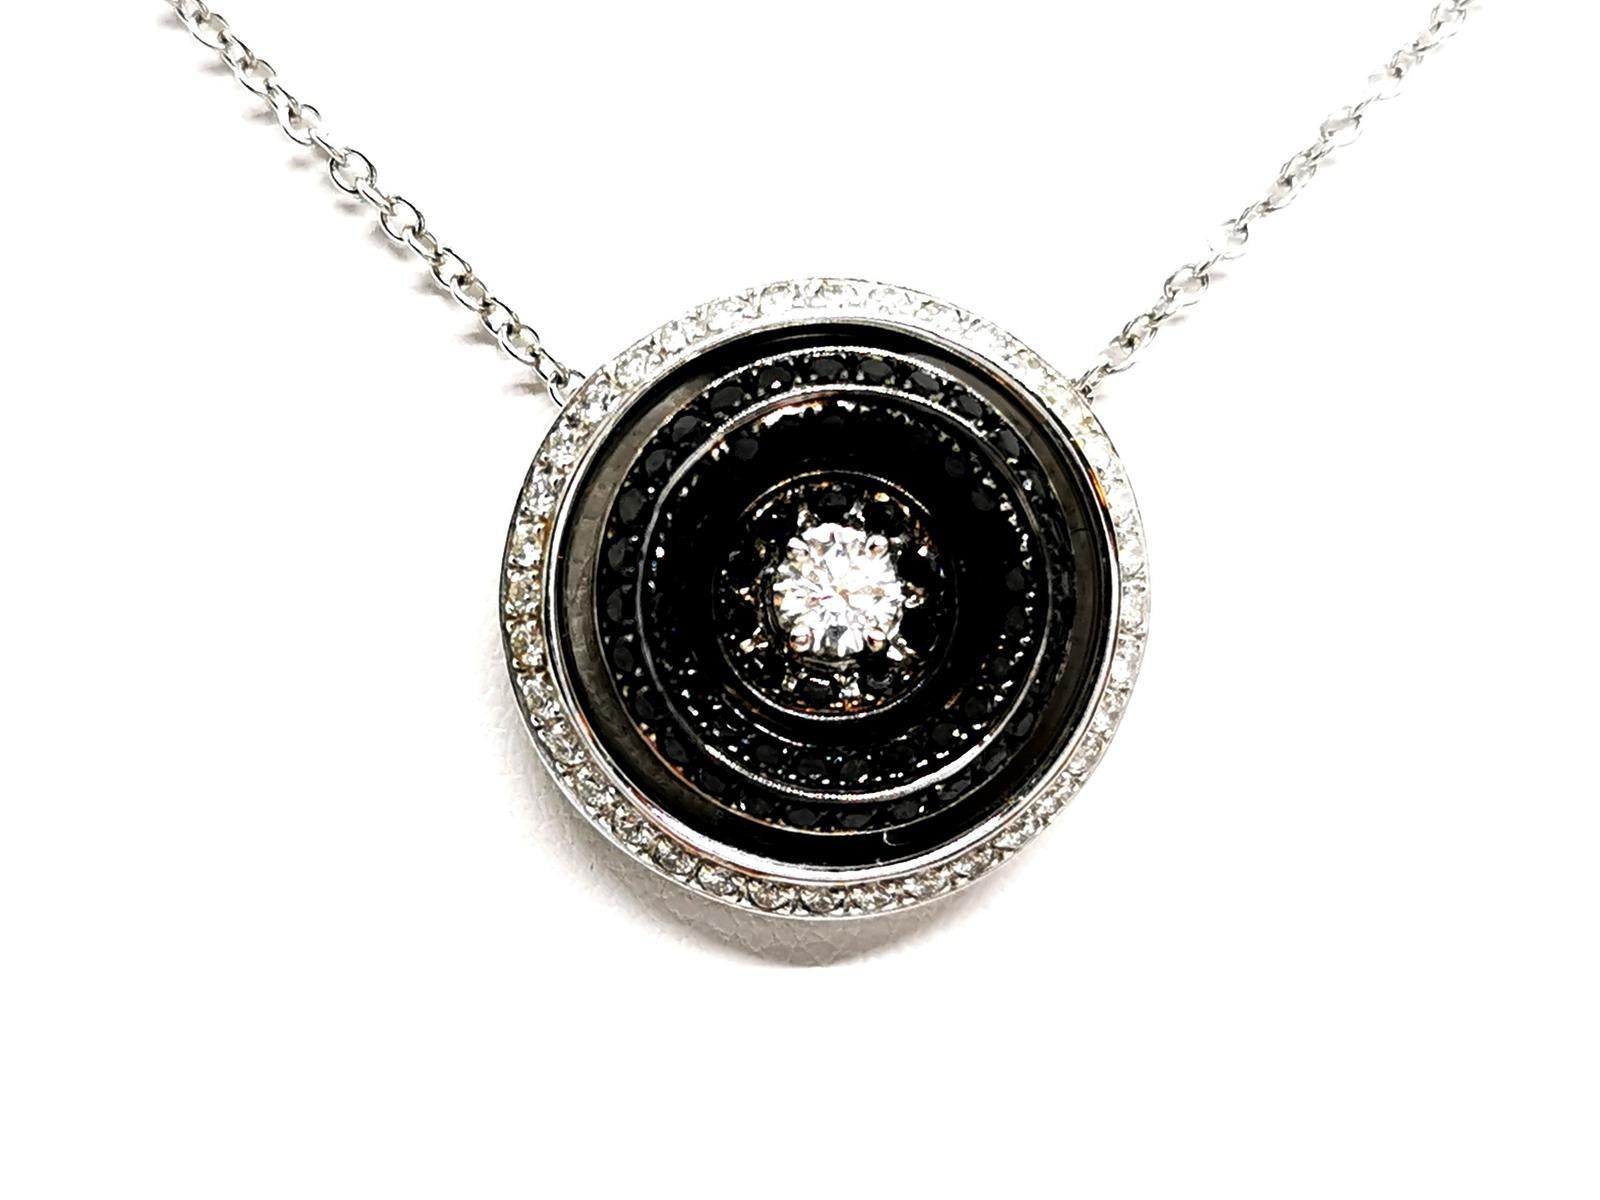 white gold necklace 750 thousandths (18 carats). pendant round. set in the center of a white diamond. brilliant cut approximately 0.18 ct. surrounded by 62 black diamonds totaling about 0.37 ct. and 37 white diamonds totaling about 0.22 ct. diamonds